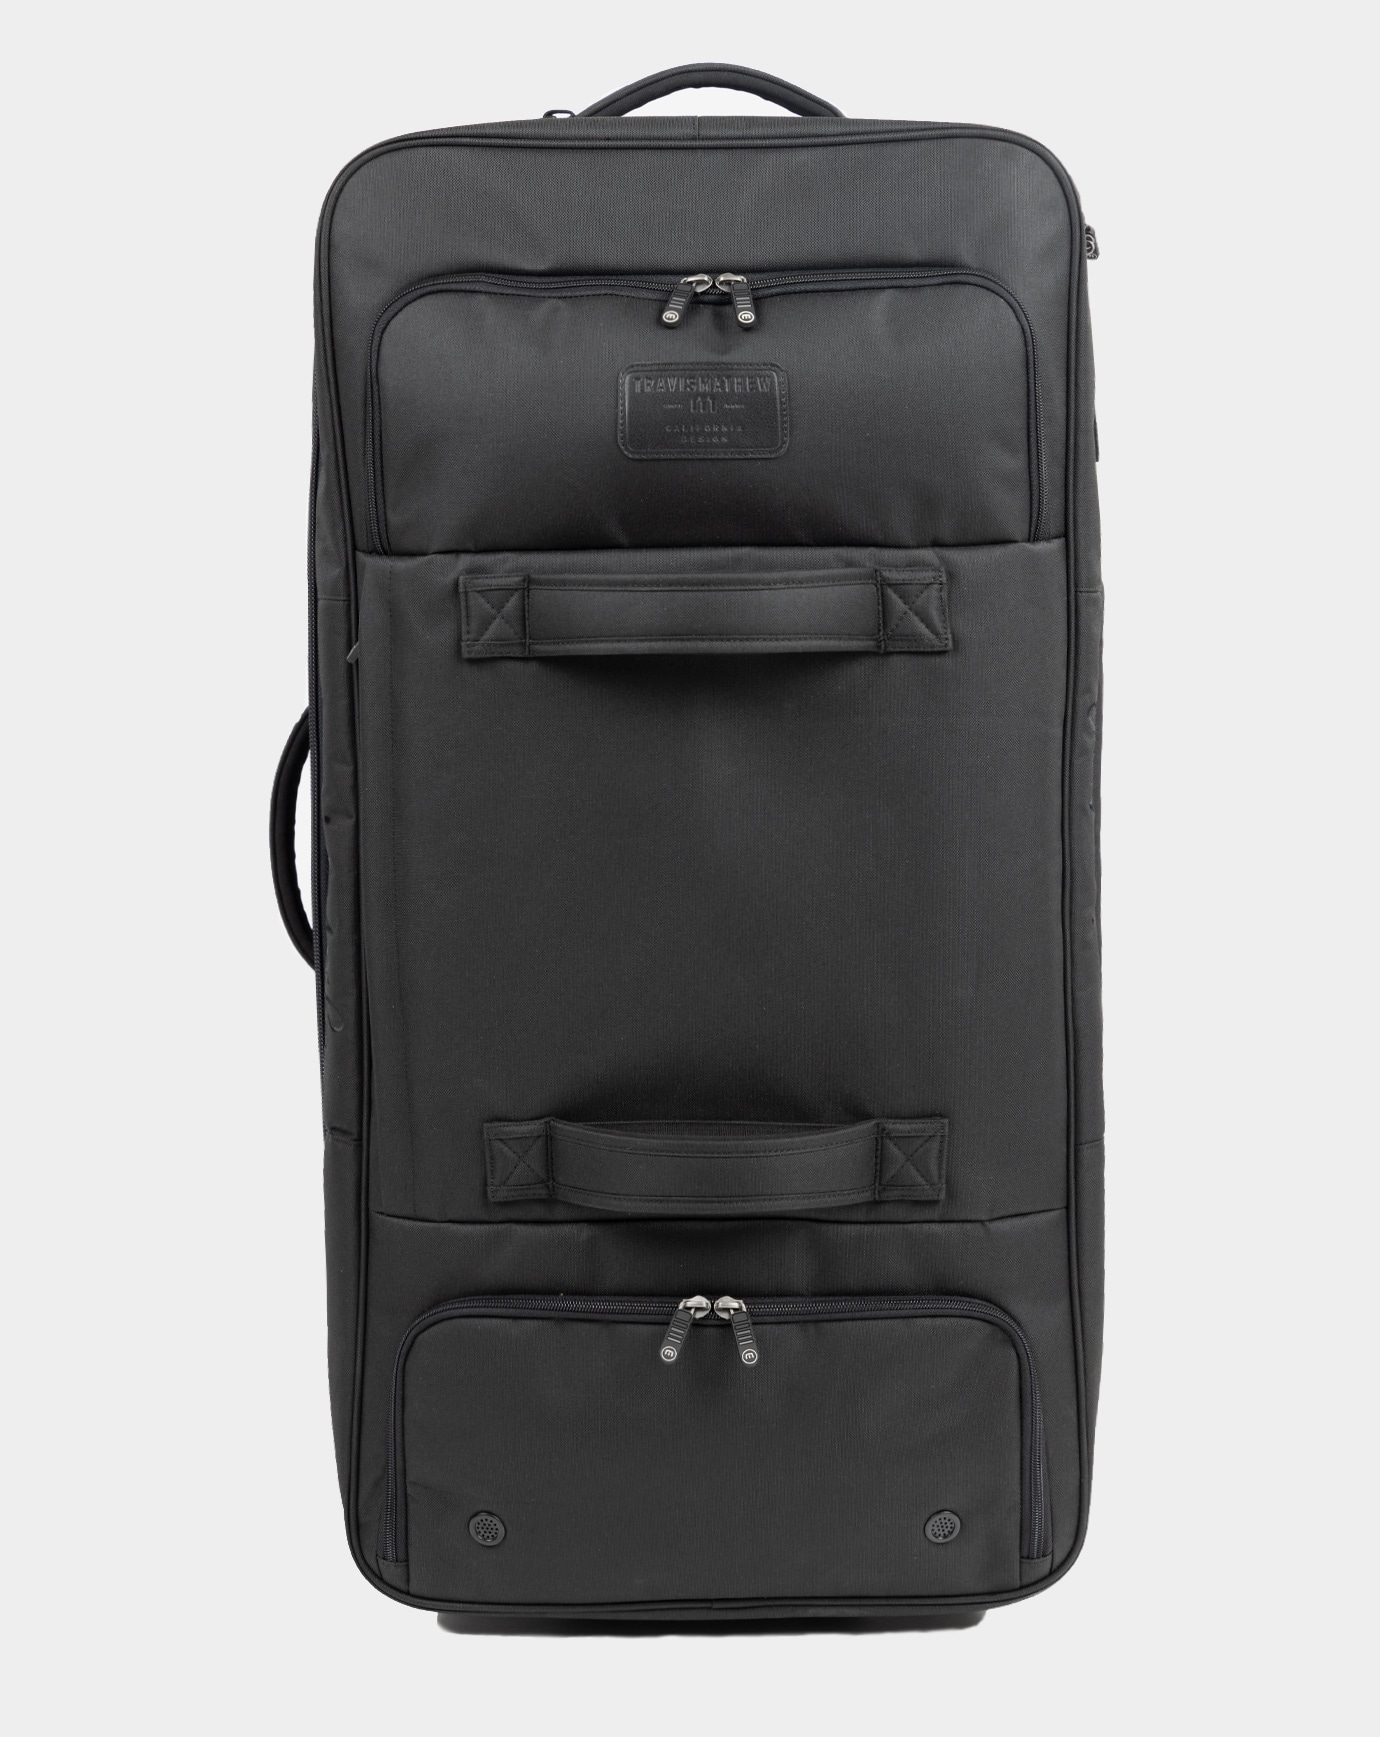 EXPRESS 2.0 SUITCASE_1MW562_0BLK_